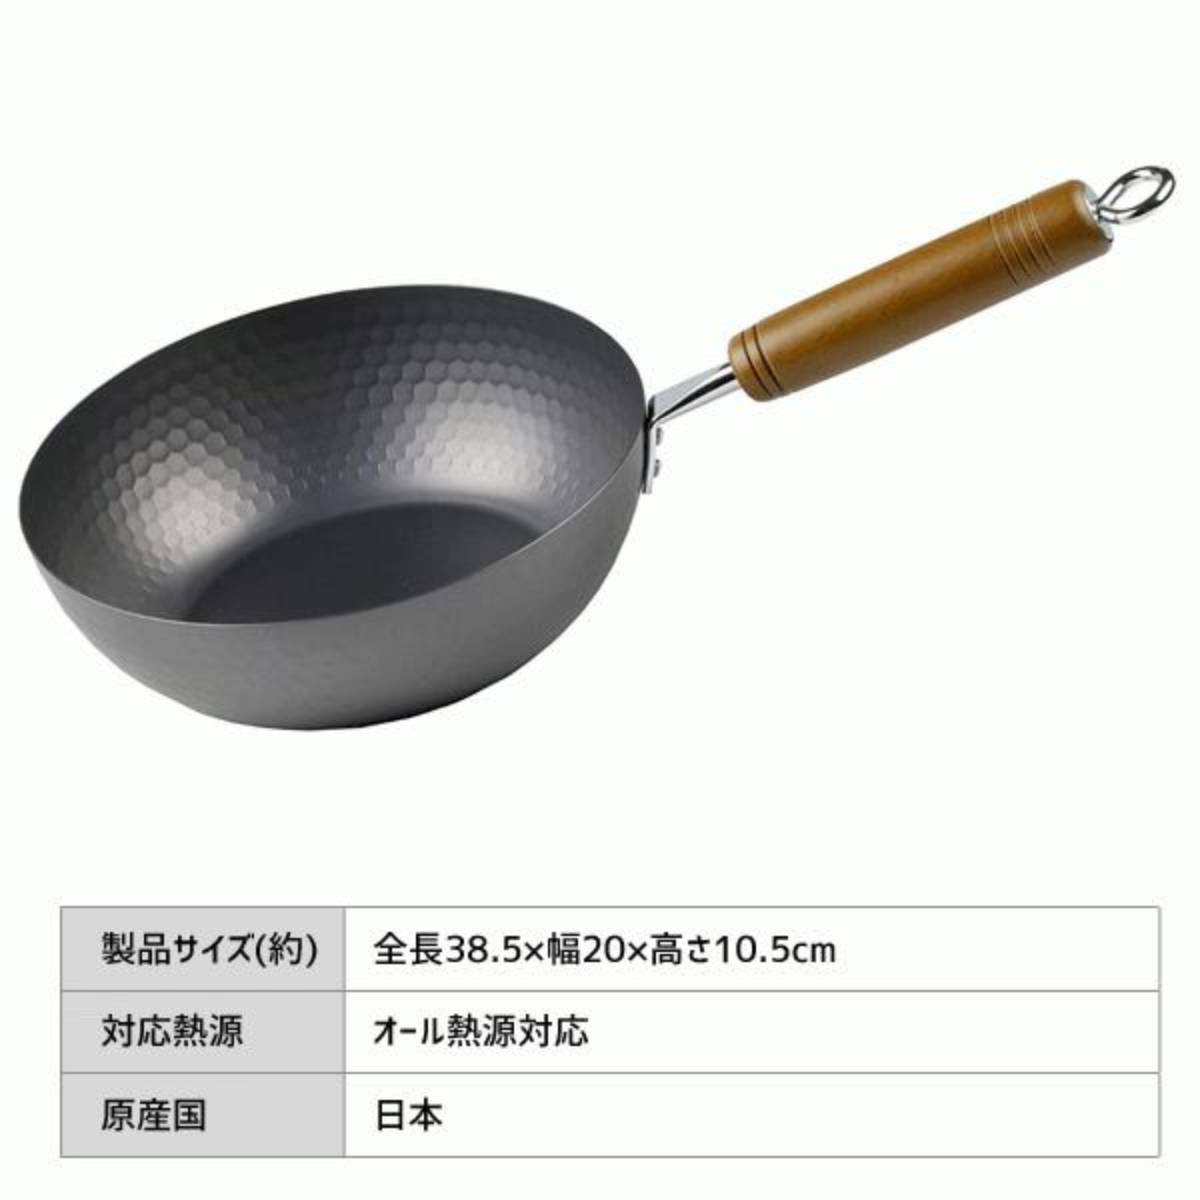 Beehive Non-Stick Frying Wok (Japan Edition)